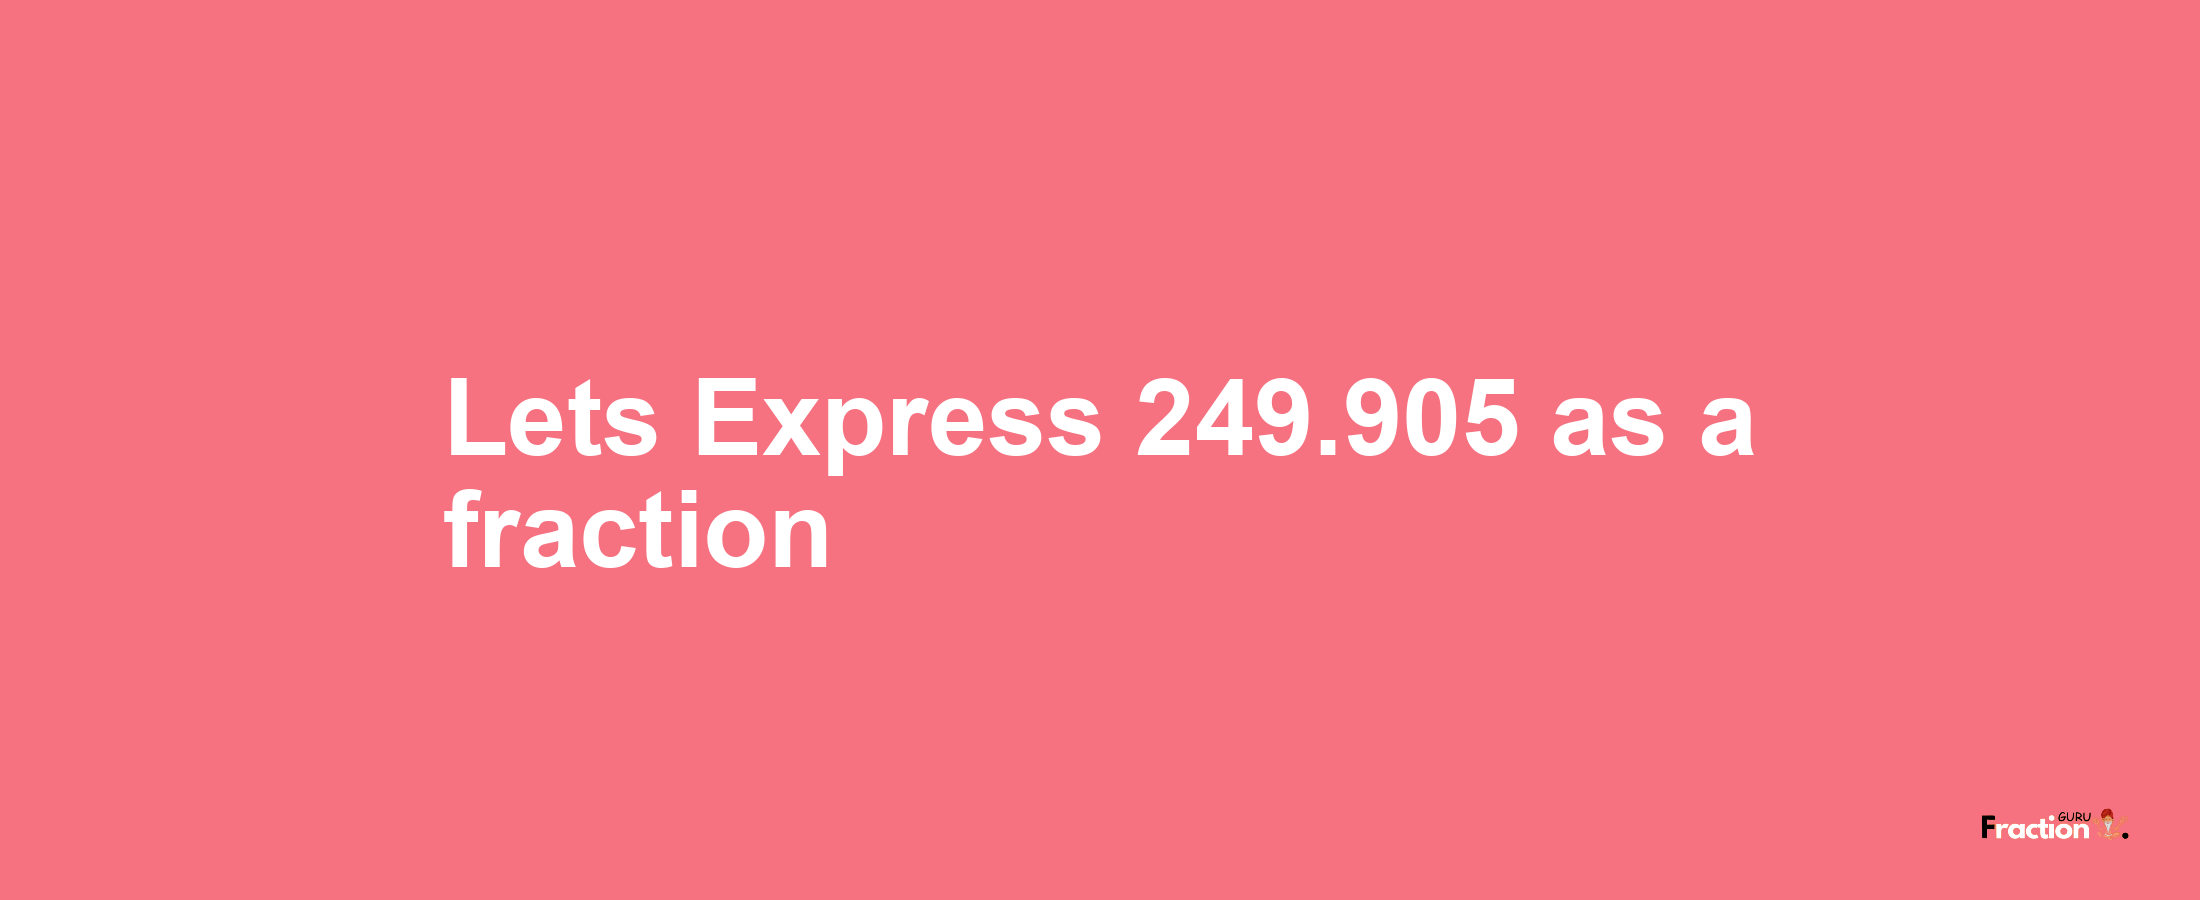 Lets Express 249.905 as afraction